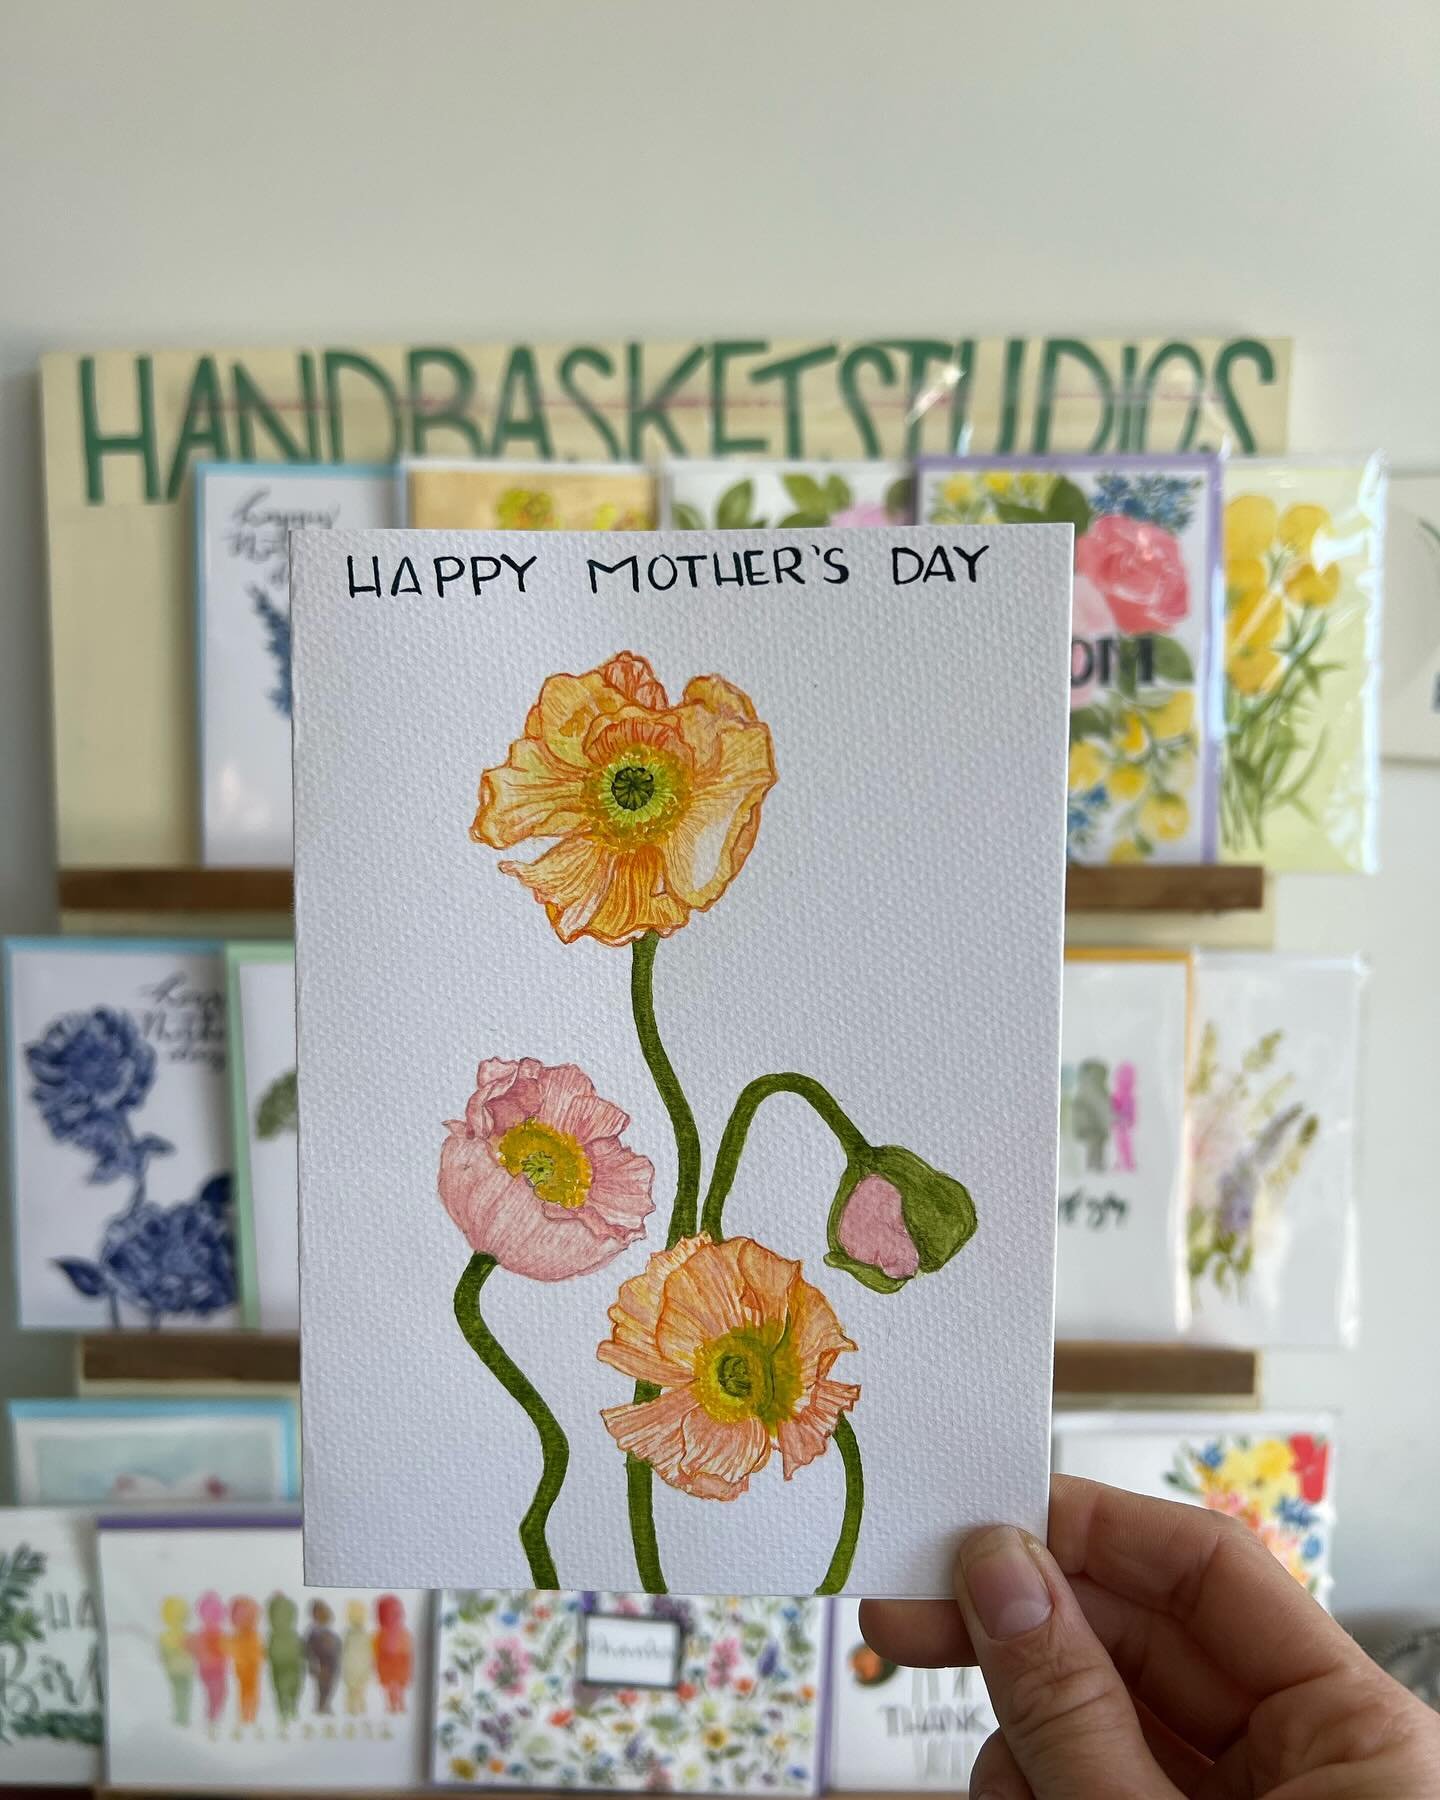 🗣️Pssssst Mothers Day is right around the corner! We just got some beautiful new cards in from @handbasketstudios  that would be perfect for the special mamas, grandmamas, or aunts and friends who are like mamas, in your life. Stop by and grab a car